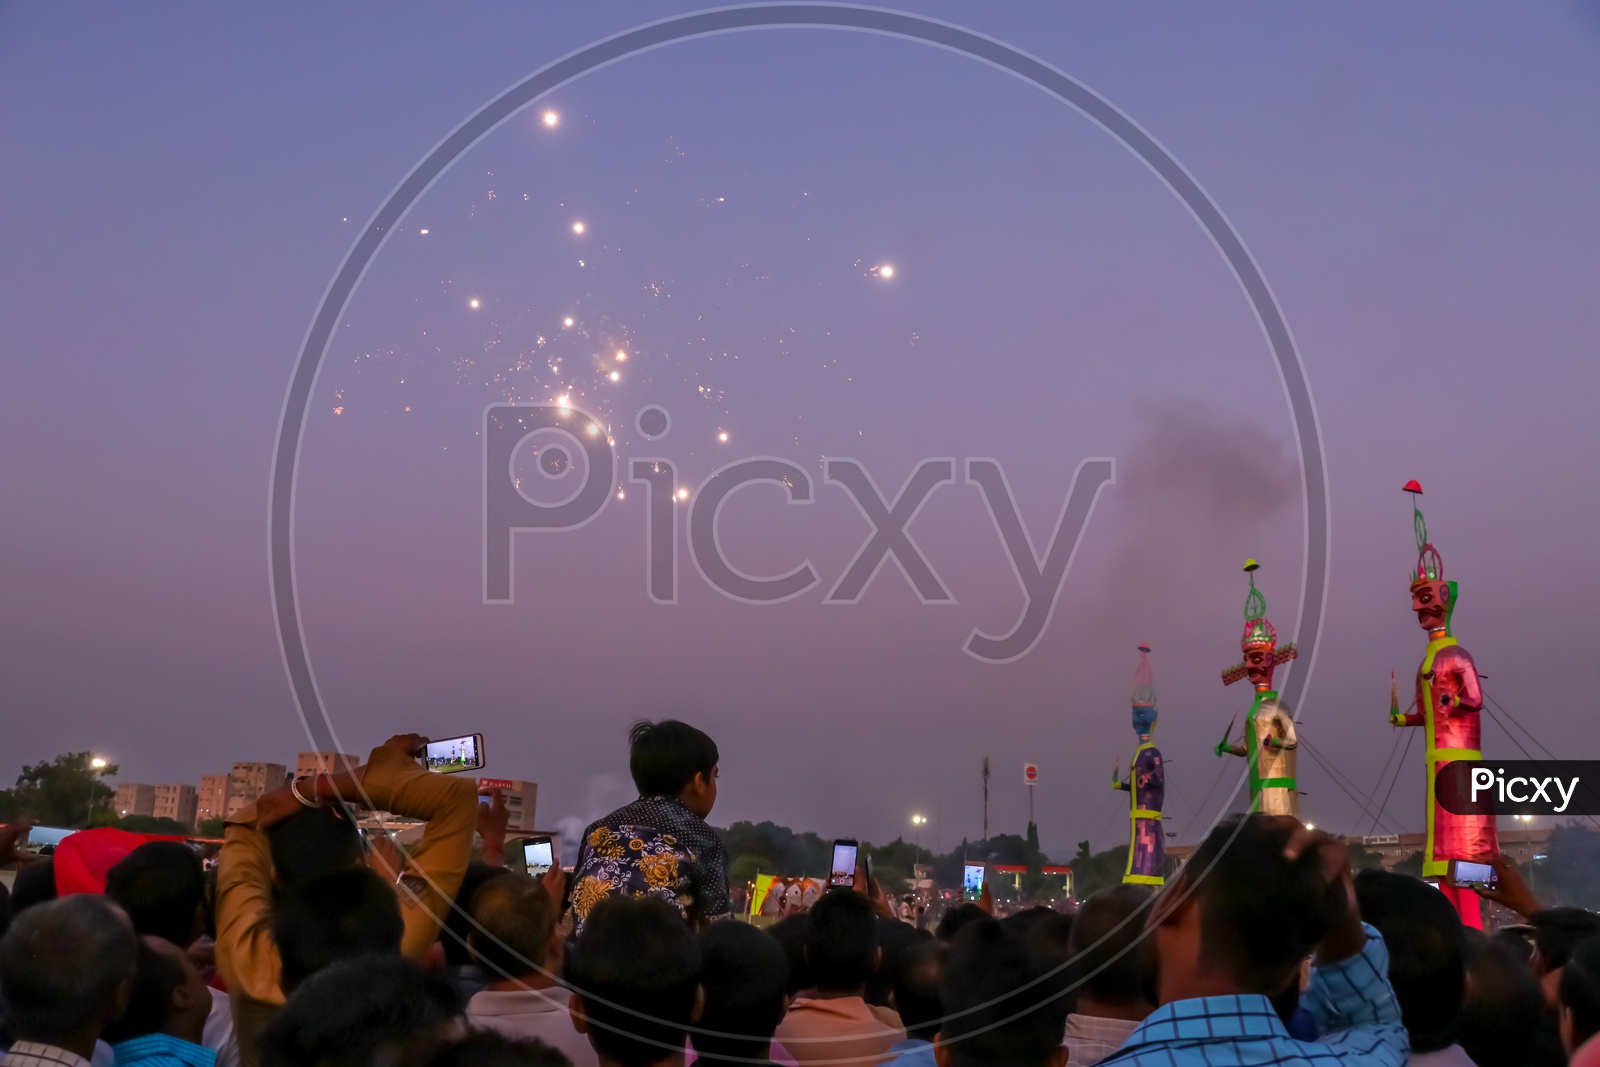 Crowd watching the fire works during Dussehra celebrations, 2019